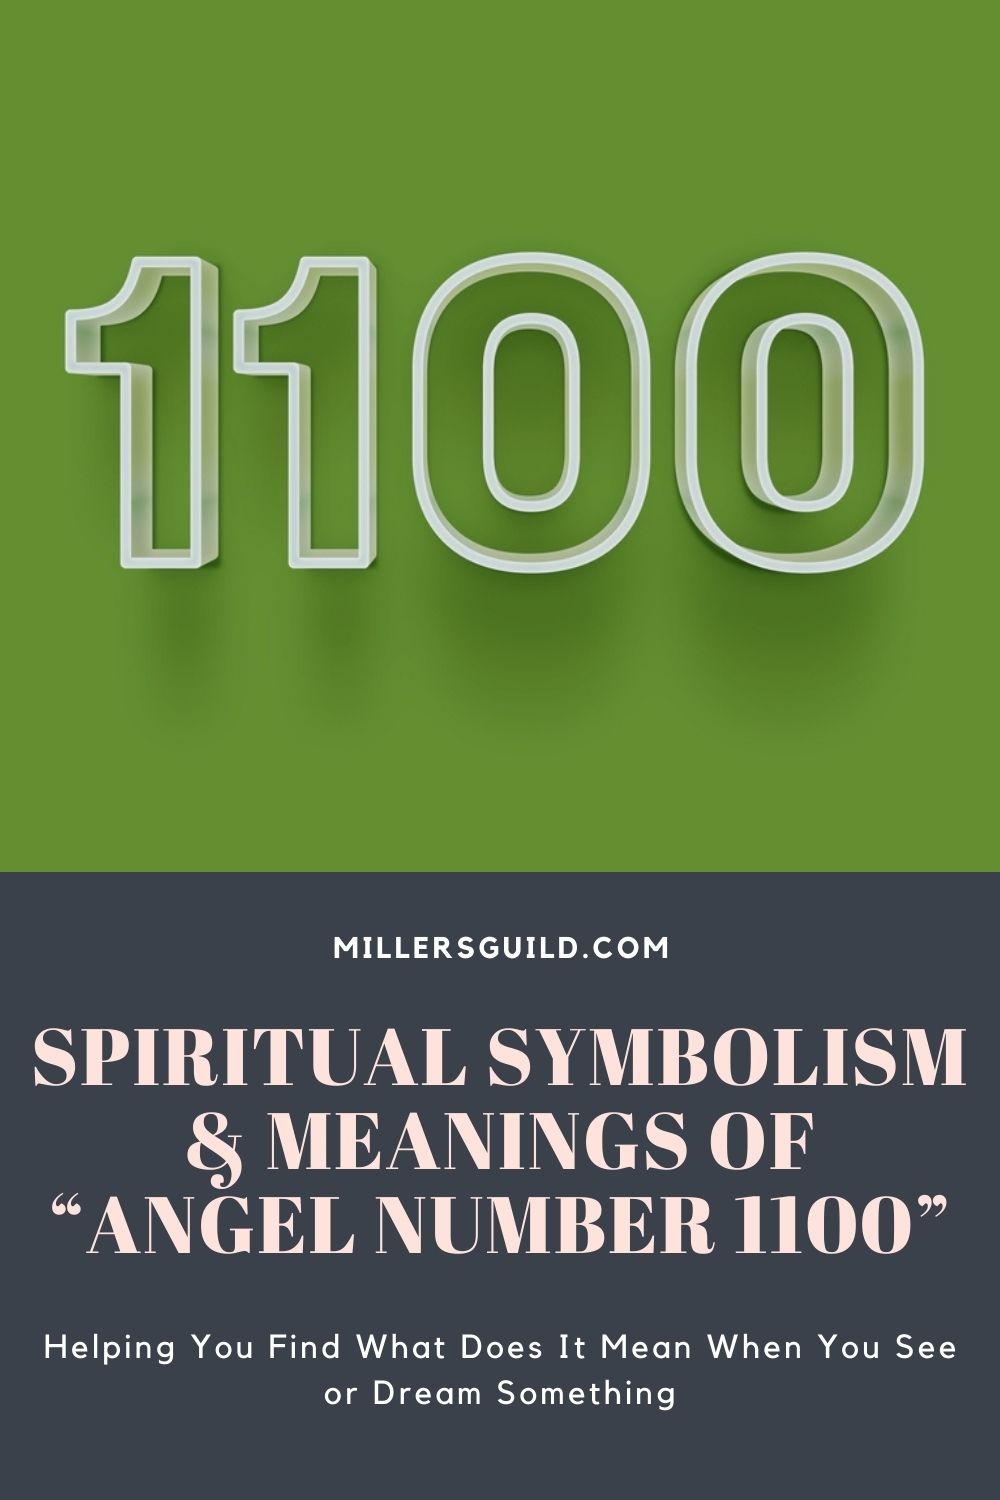 Spiritual Symbolism & Meanings of “Angel Number 1100”（2）